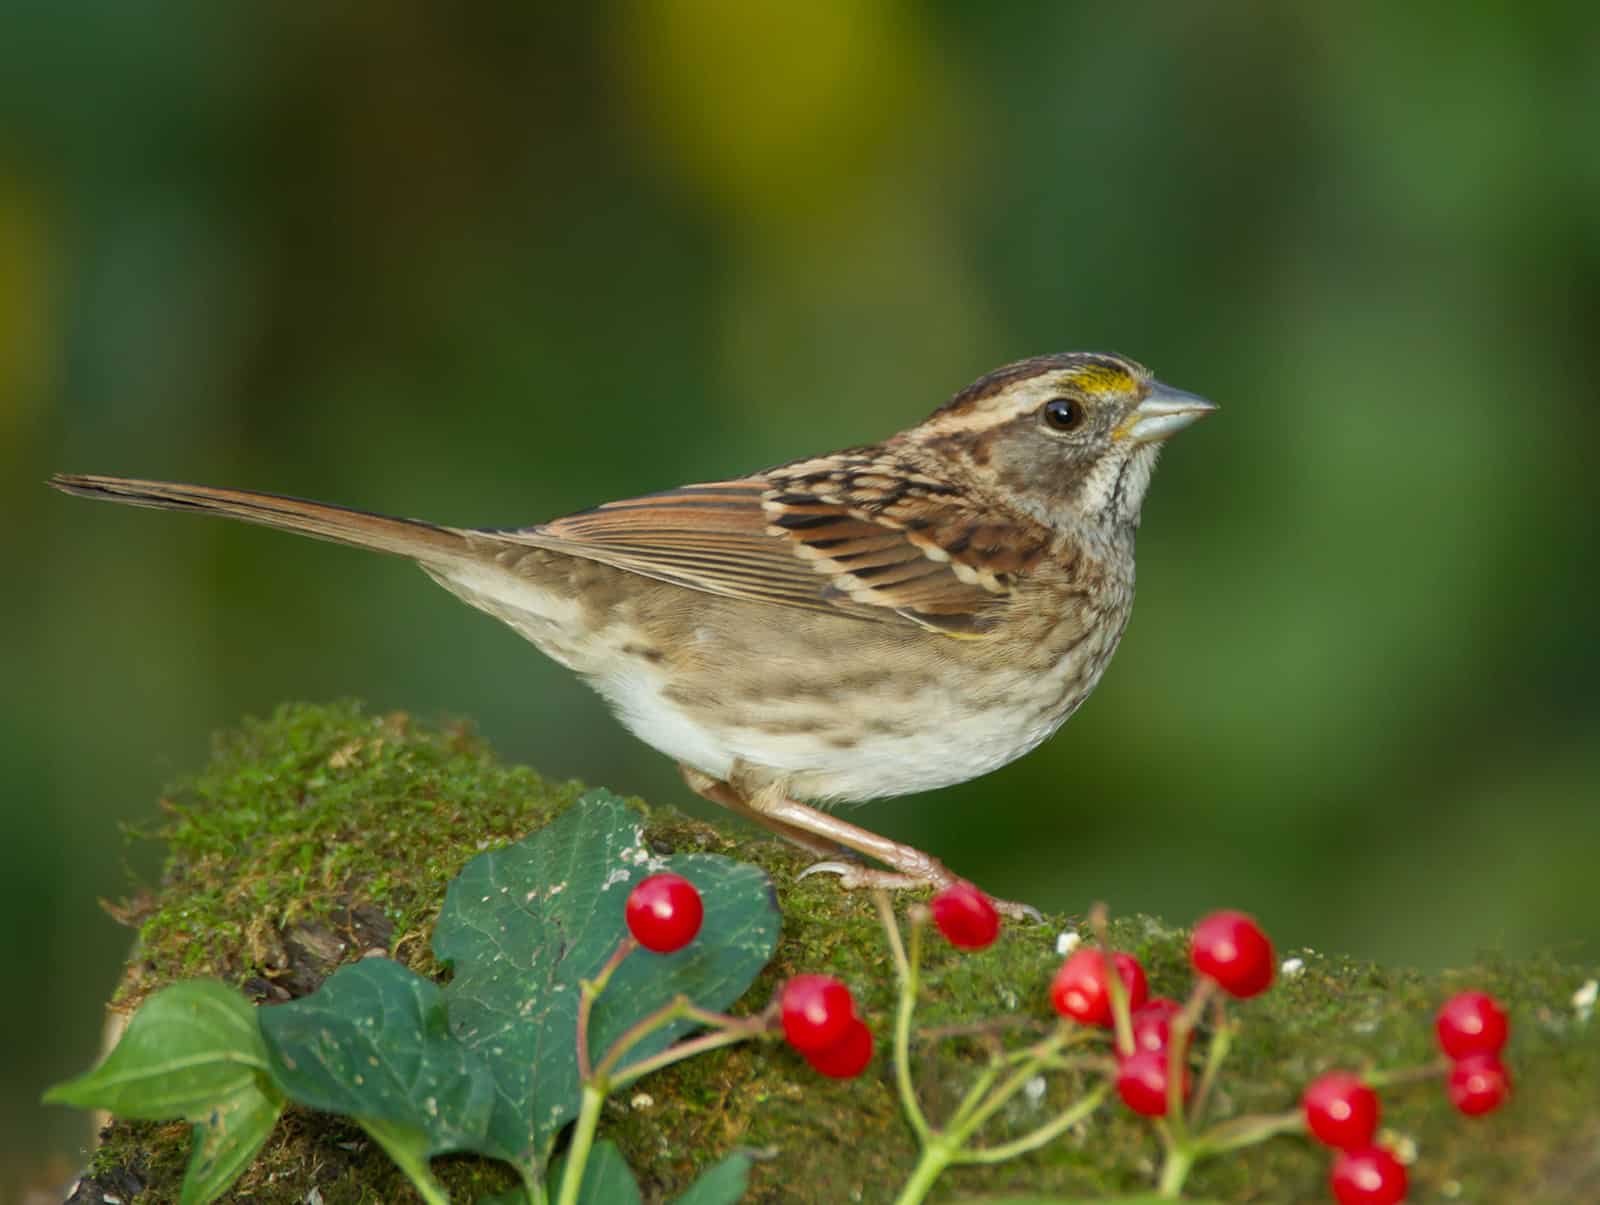 White-throated sparrow. Photo by Shutterstock.